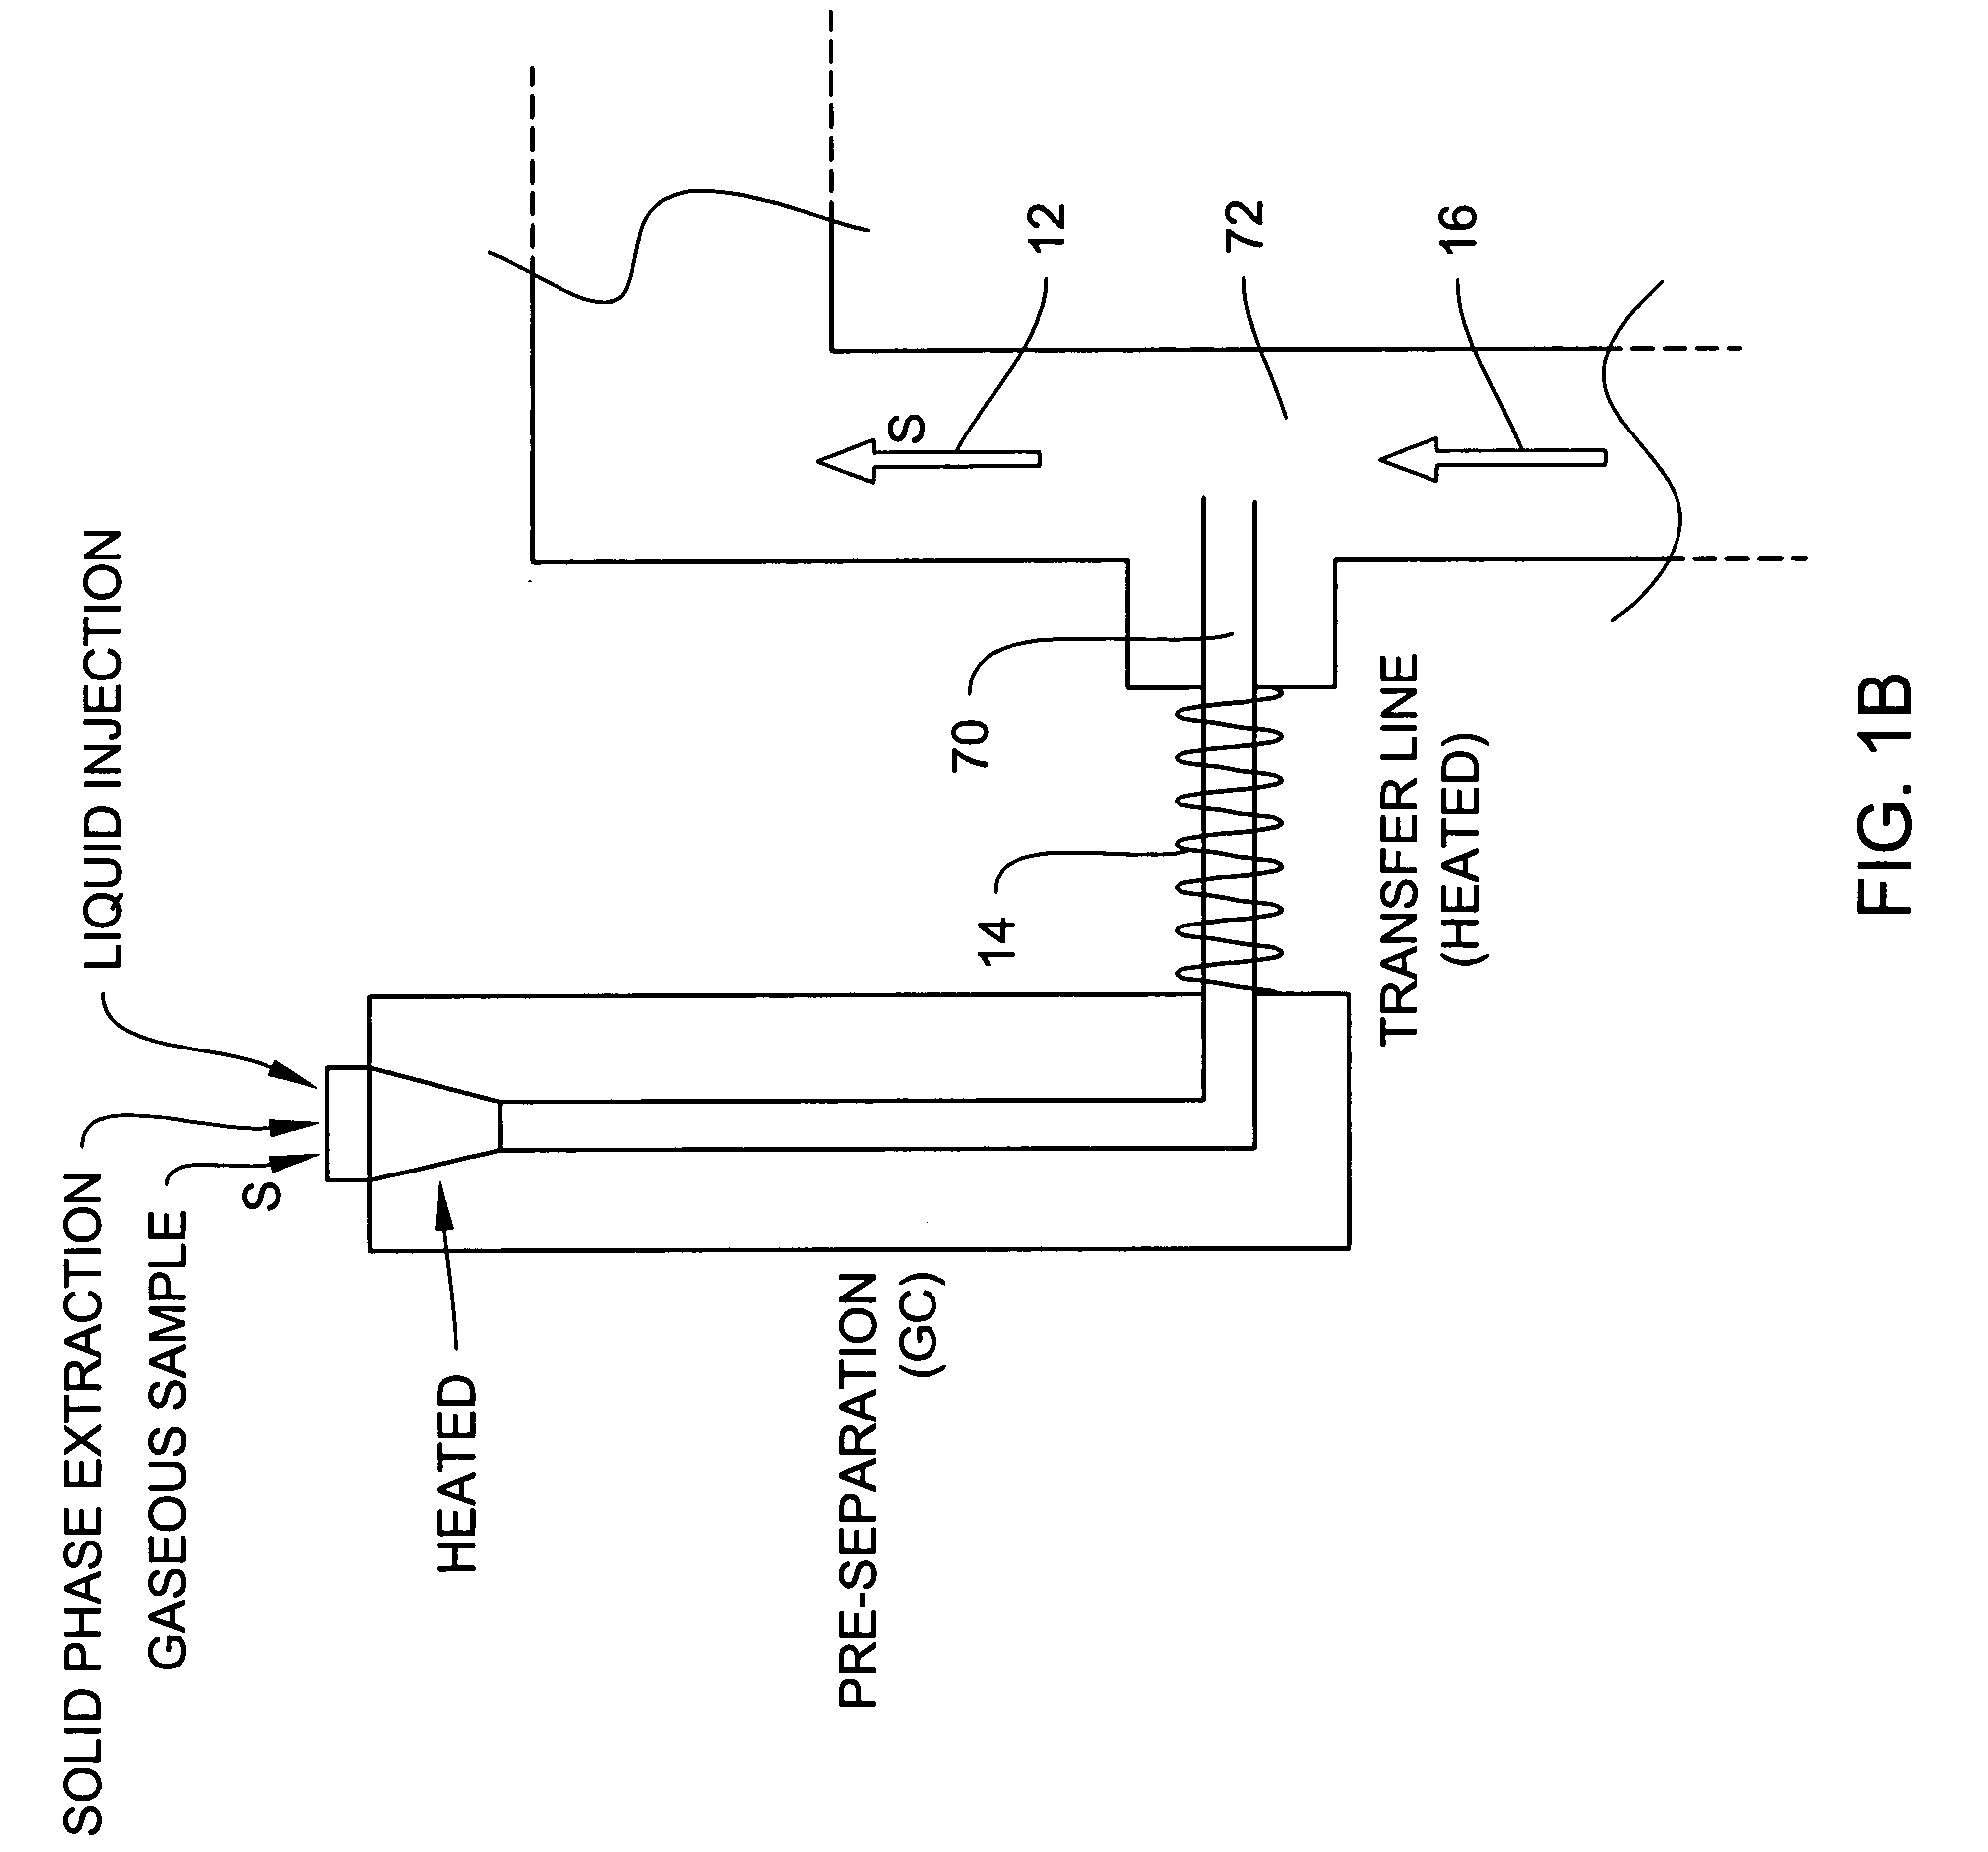 Explosives detection using differential ion mobility spectrometry